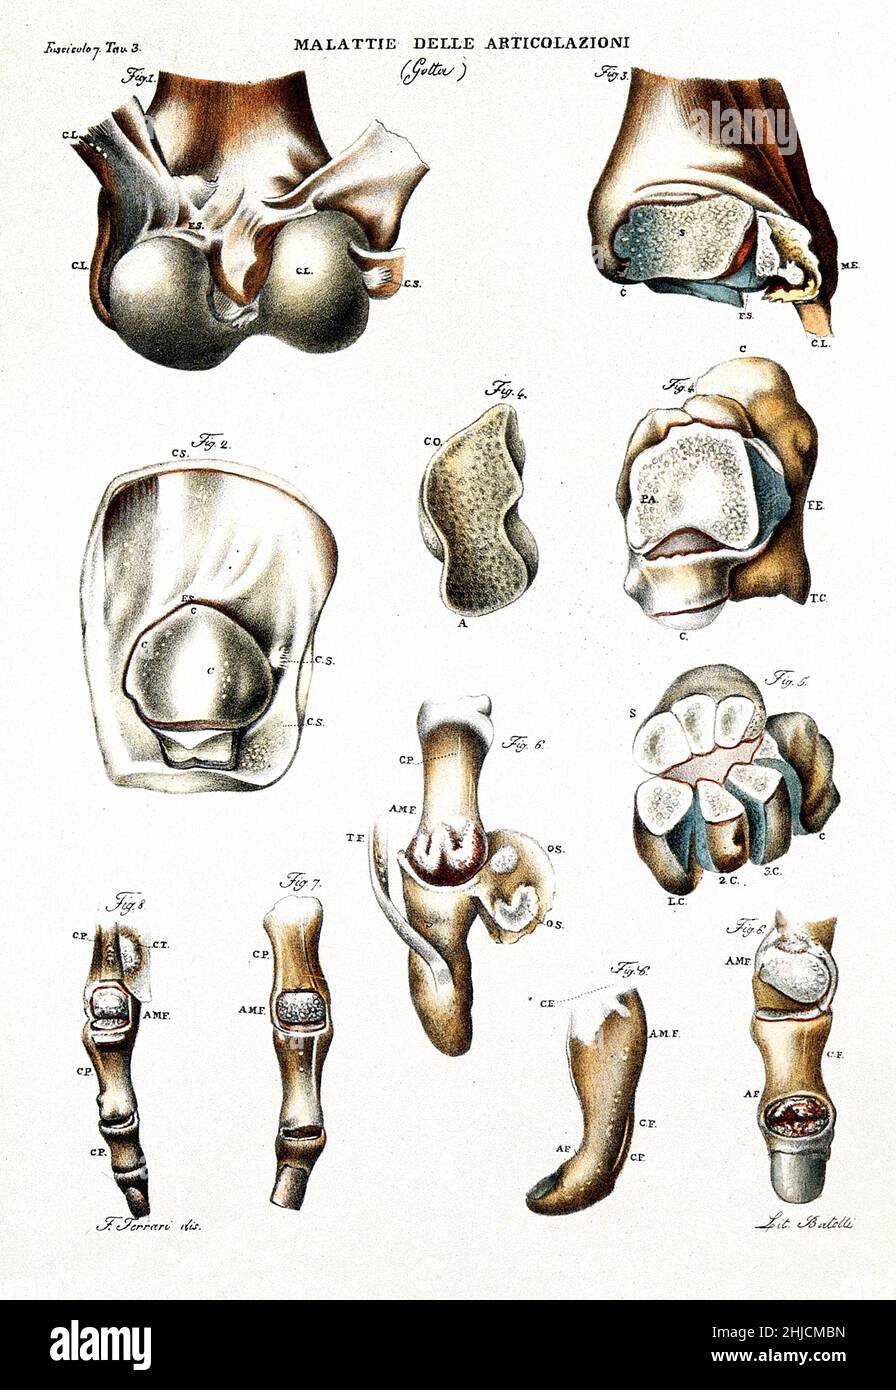 Several examples of diseased joints from gout. Colored lithograph by Batelli after Ferdinando Ferrari, c. 1843. Stock Photo